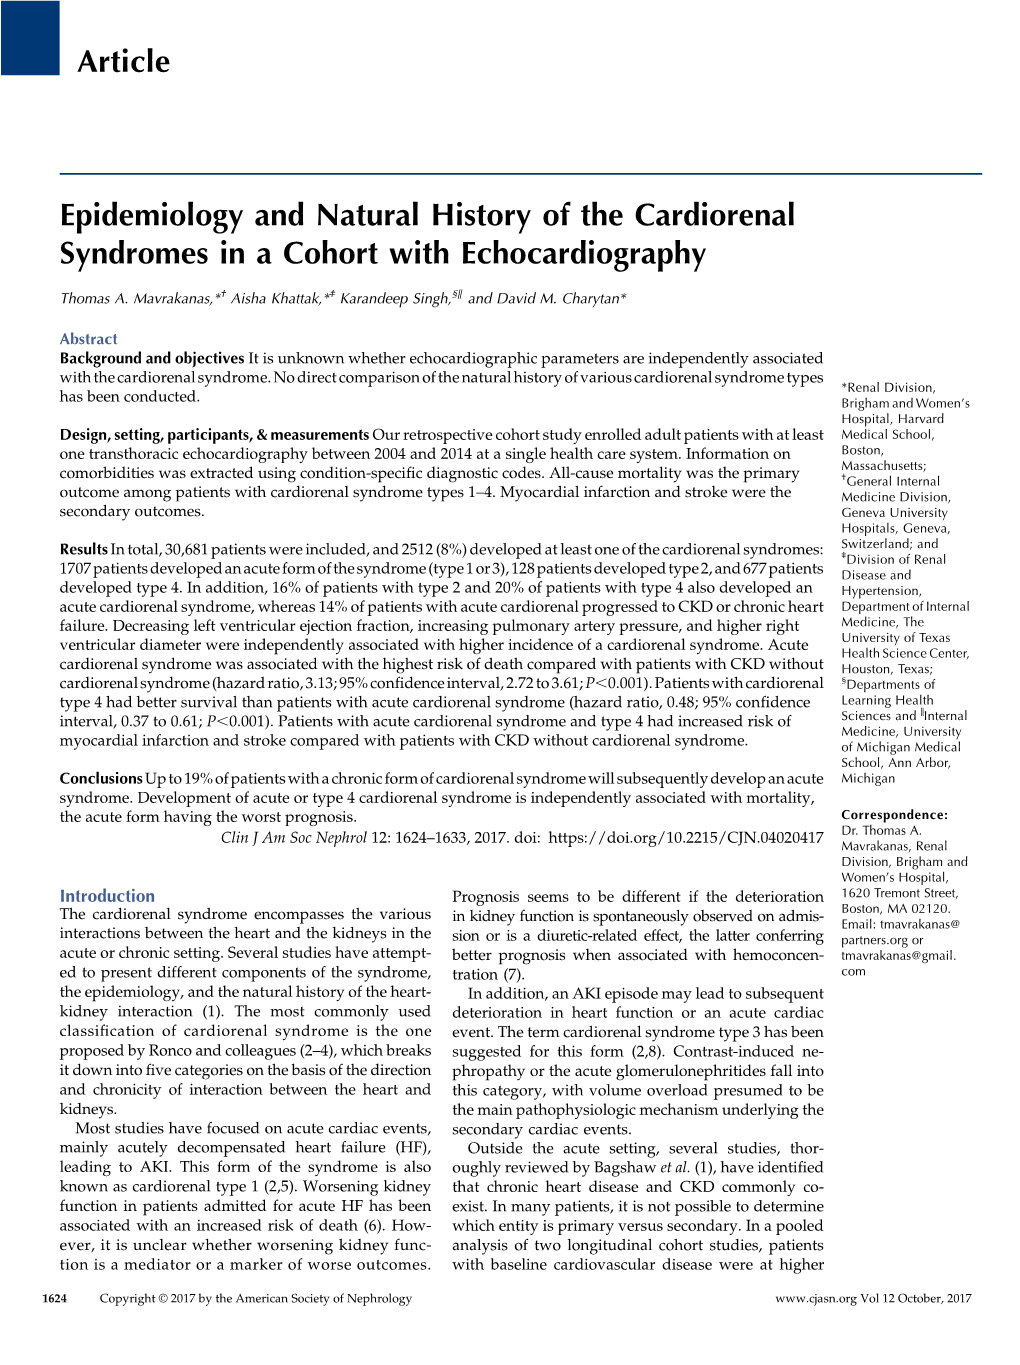 Epidemiology and Natural History of the Cardiorenal Syndromes in a Cohort with Echocardiography